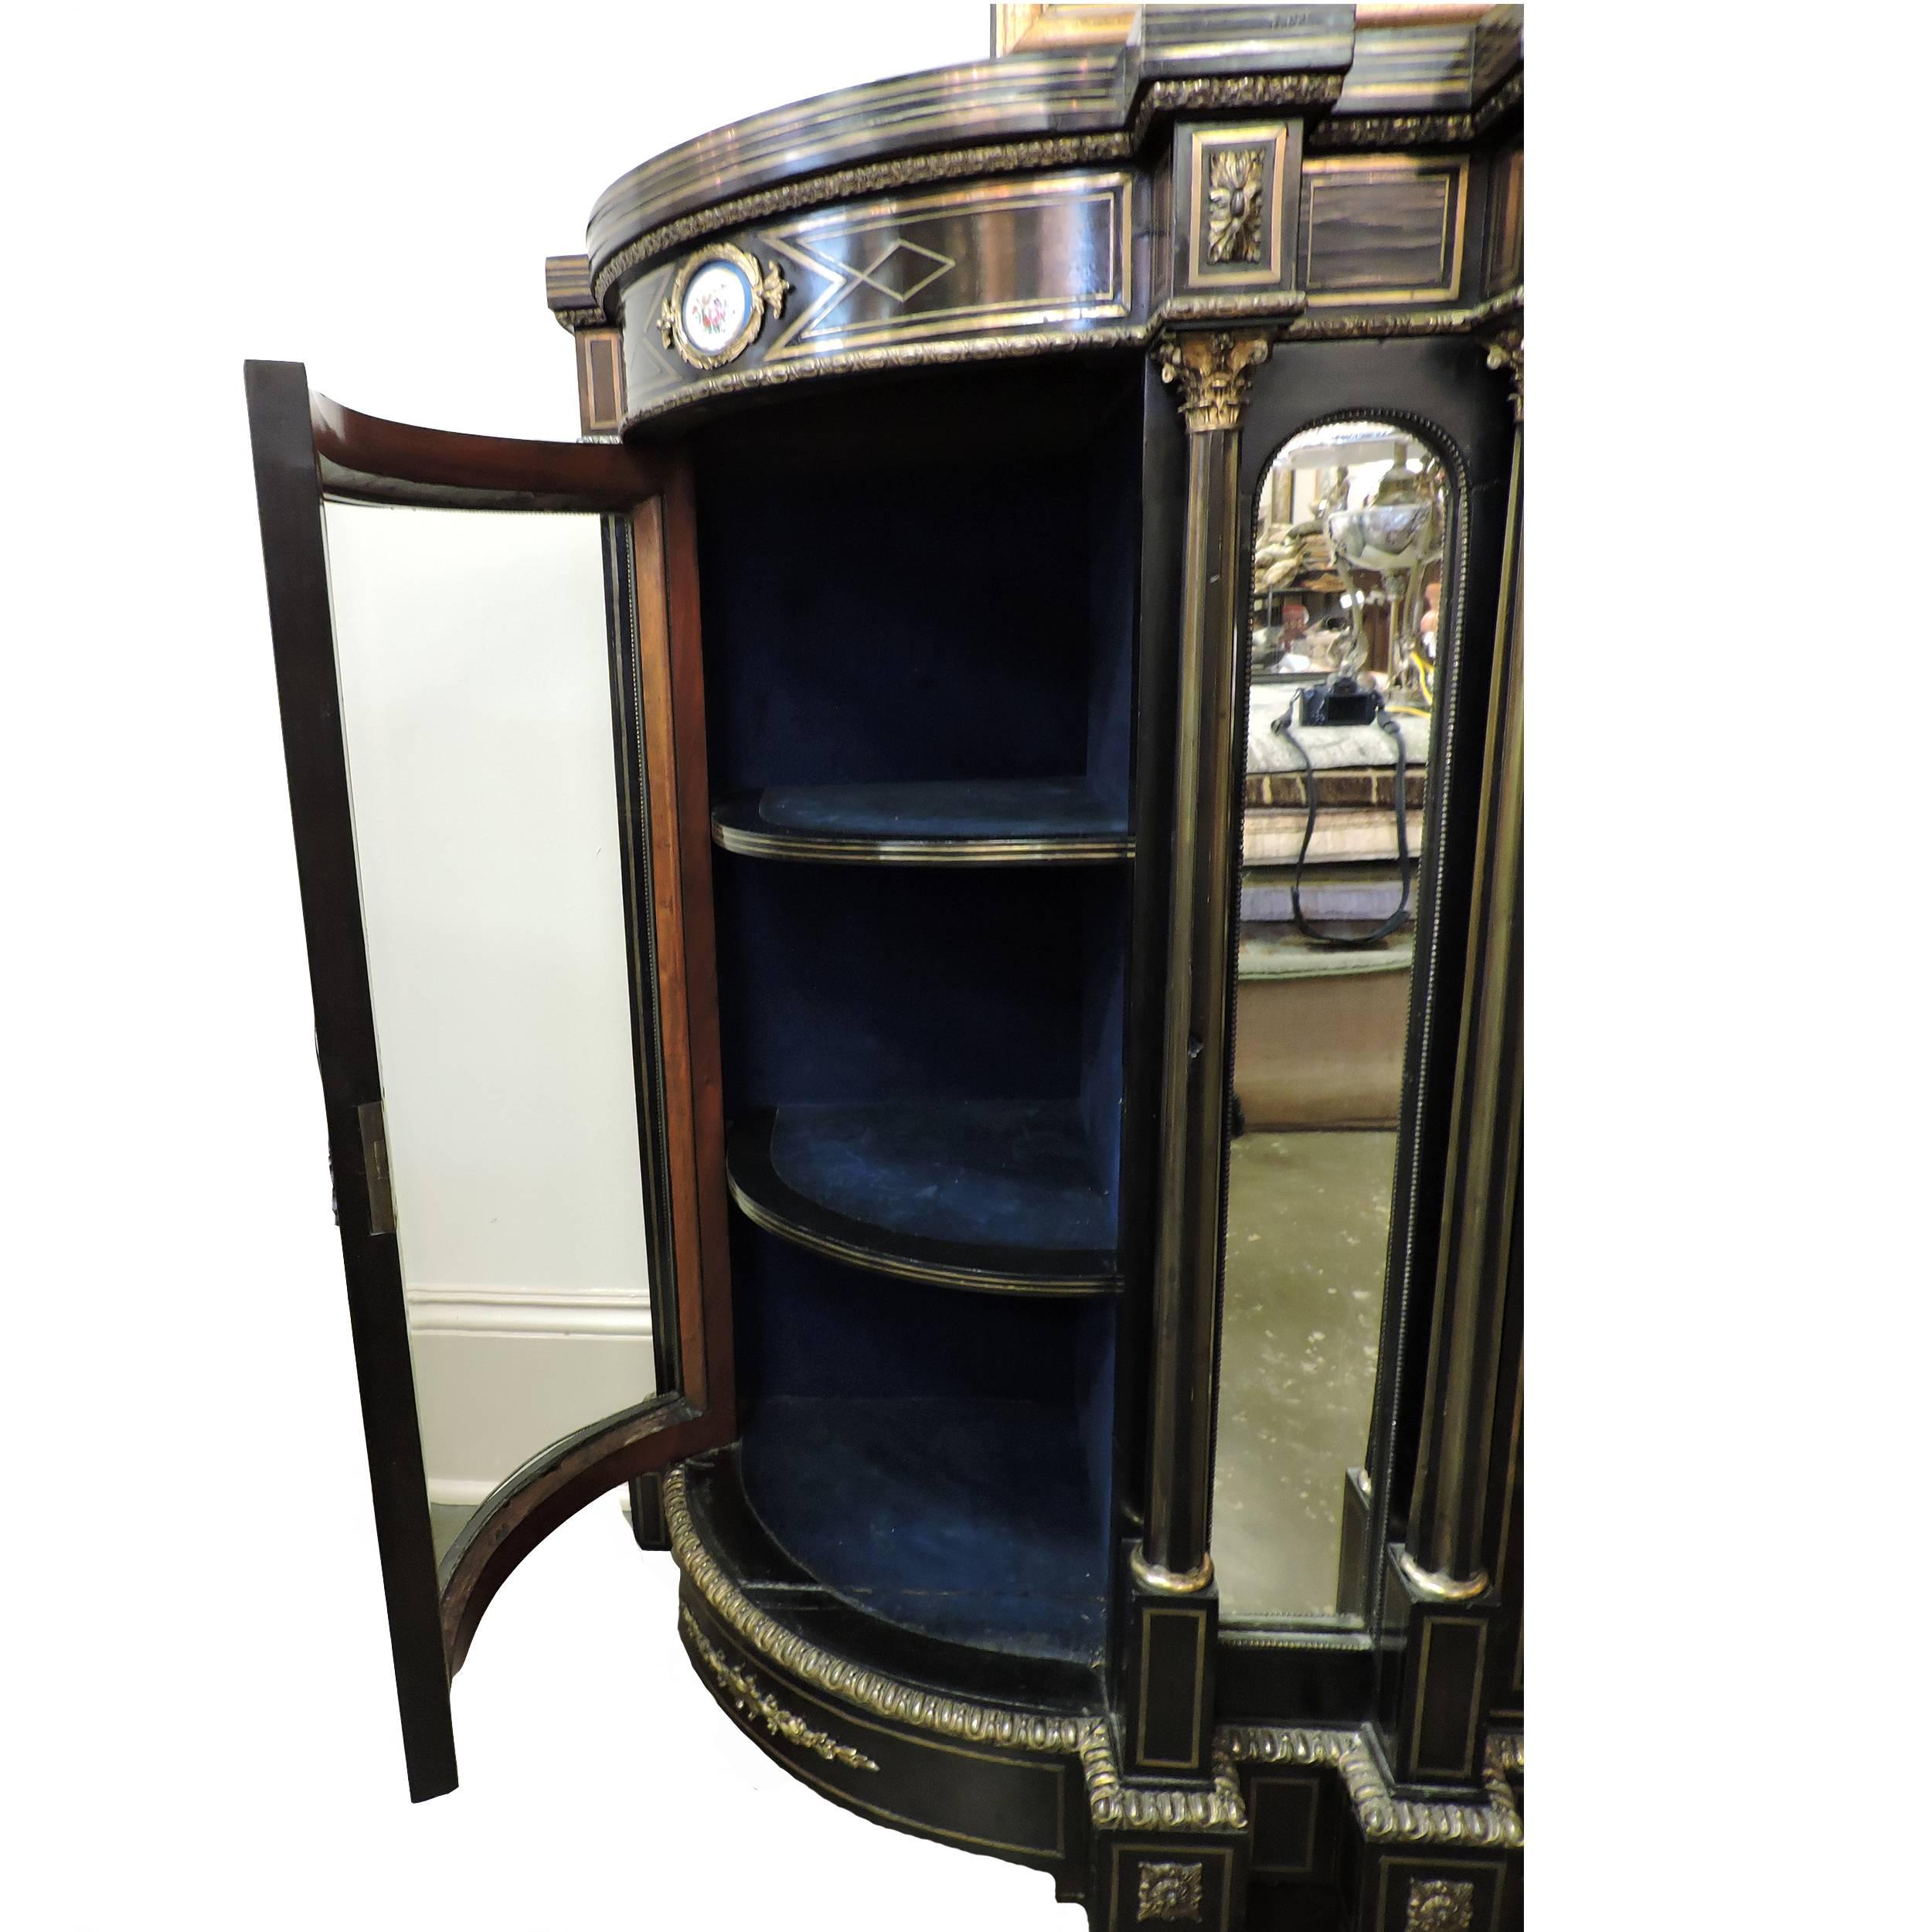 This beautiful French Louis XIV style black commode has its original bronze inlay boulle work with gold finish. This piece is complete with four hand-painted Sevres porcelain plaques in amazing condition. It features glass incased display cabinets